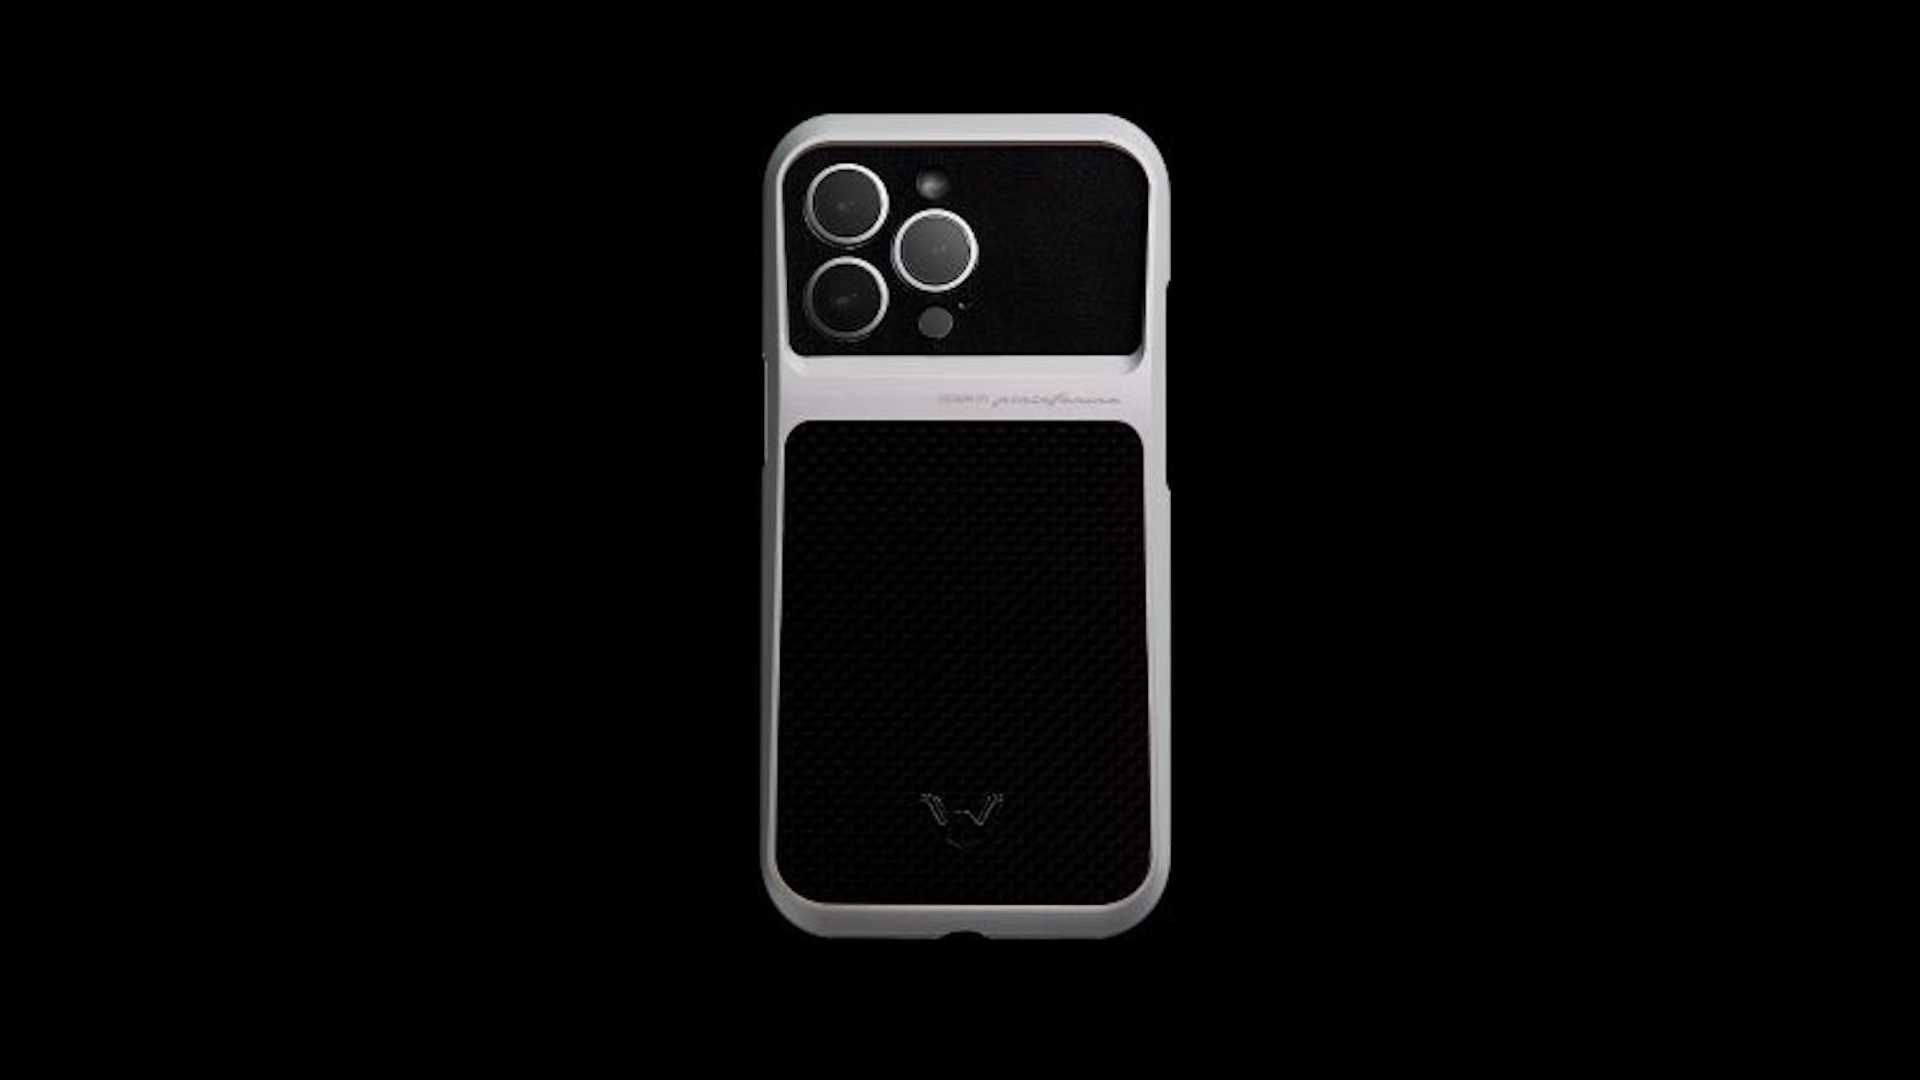 pininfarina-iphone-cases-inspired-by-modulo-concept2.jpg